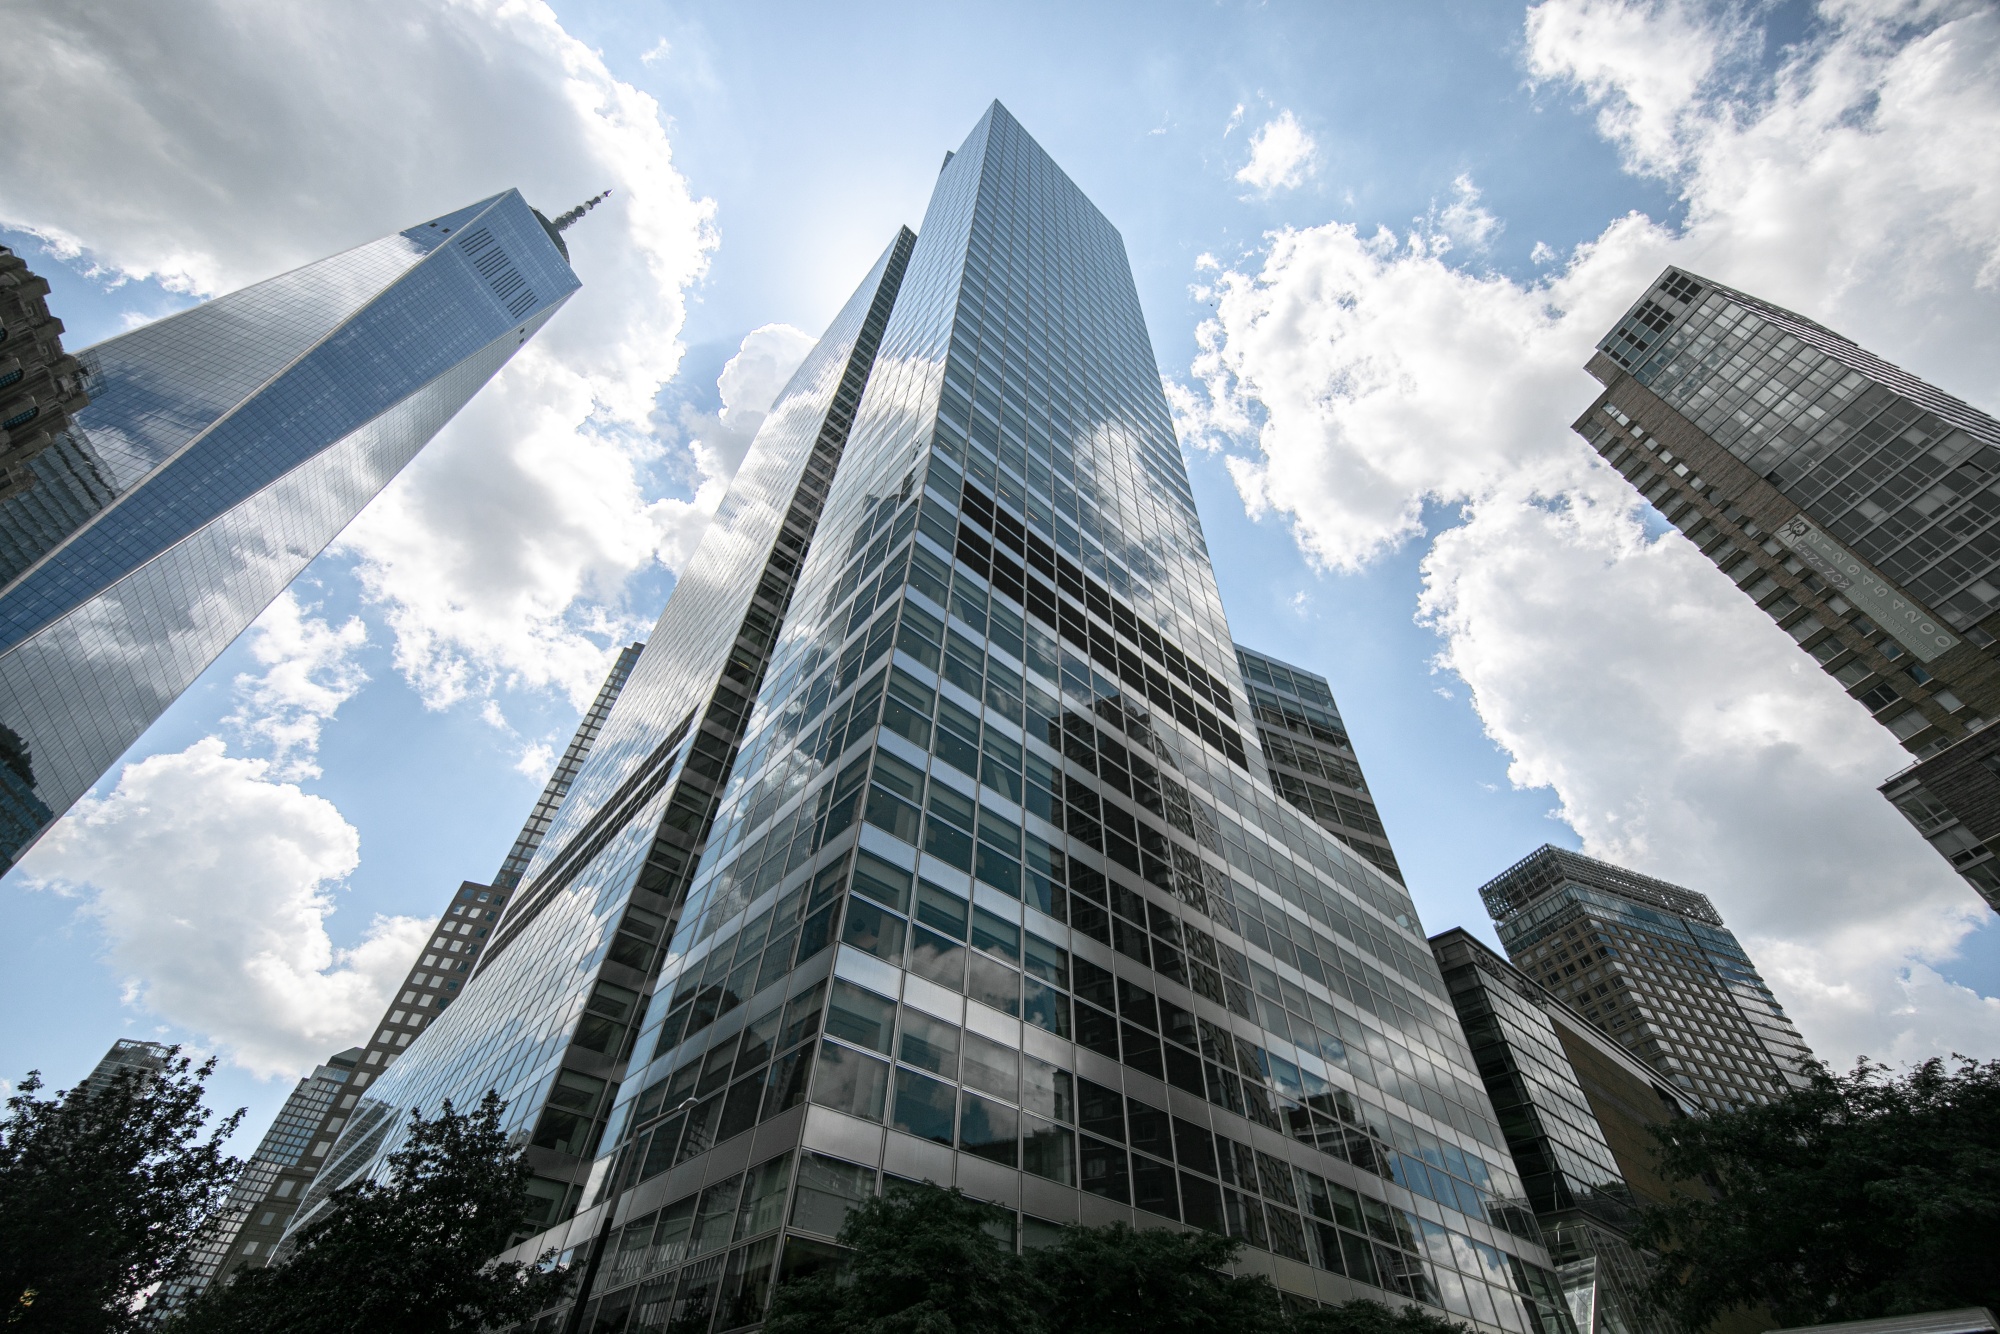 Goldman Sachs Group Inc. headquarters stands in New York, U.S., on Sunday, July 12, 2020.